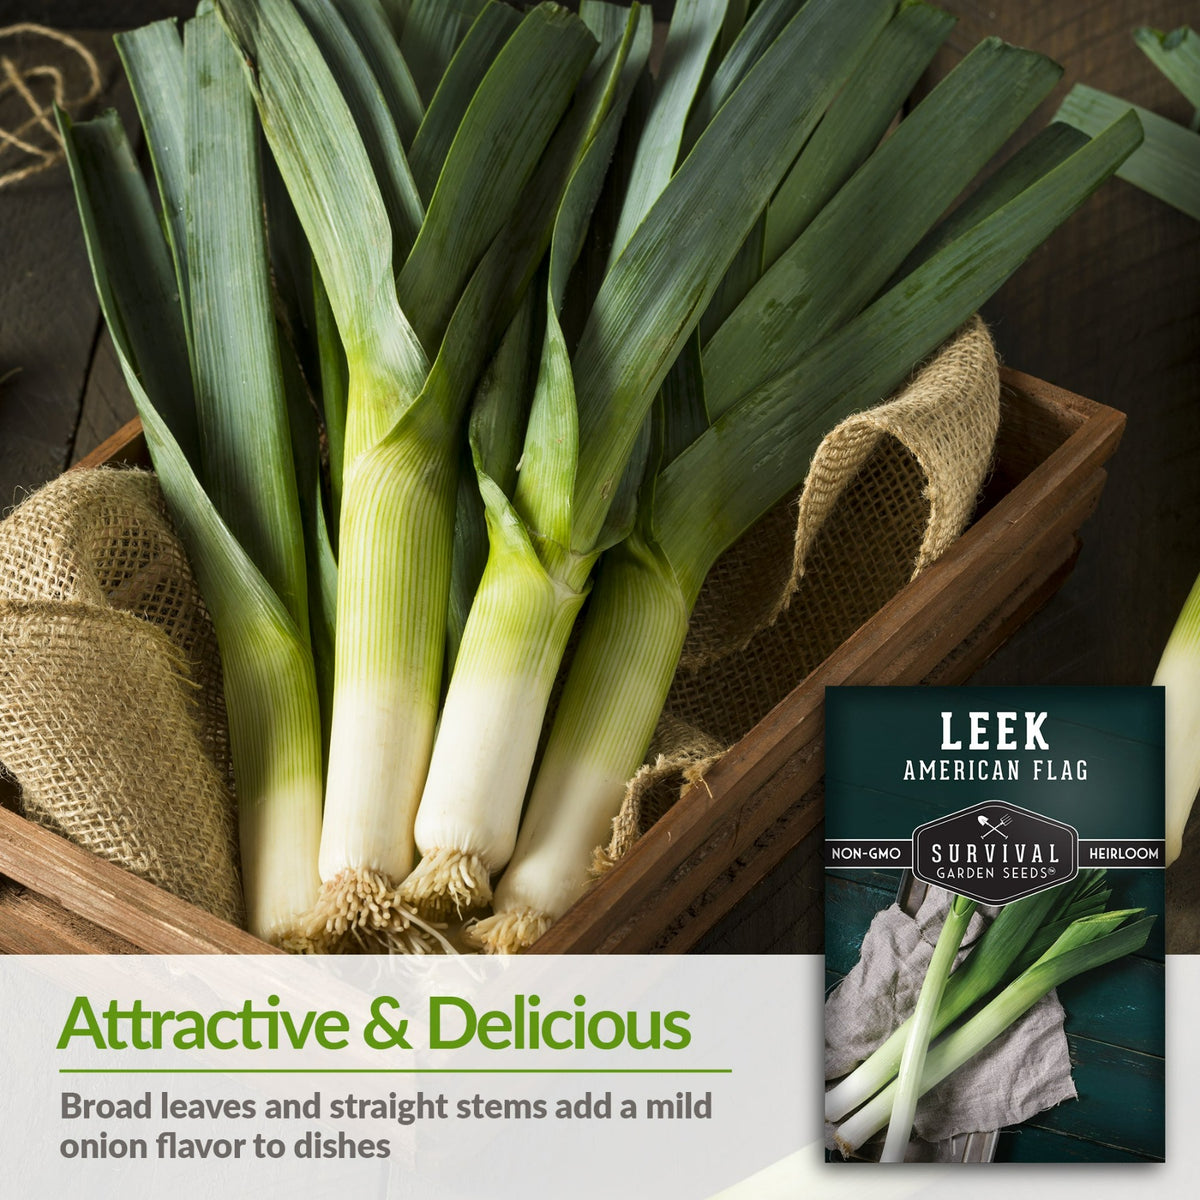 American Flag Leeks have broad leaves and straight stems that give a mild onion flavor